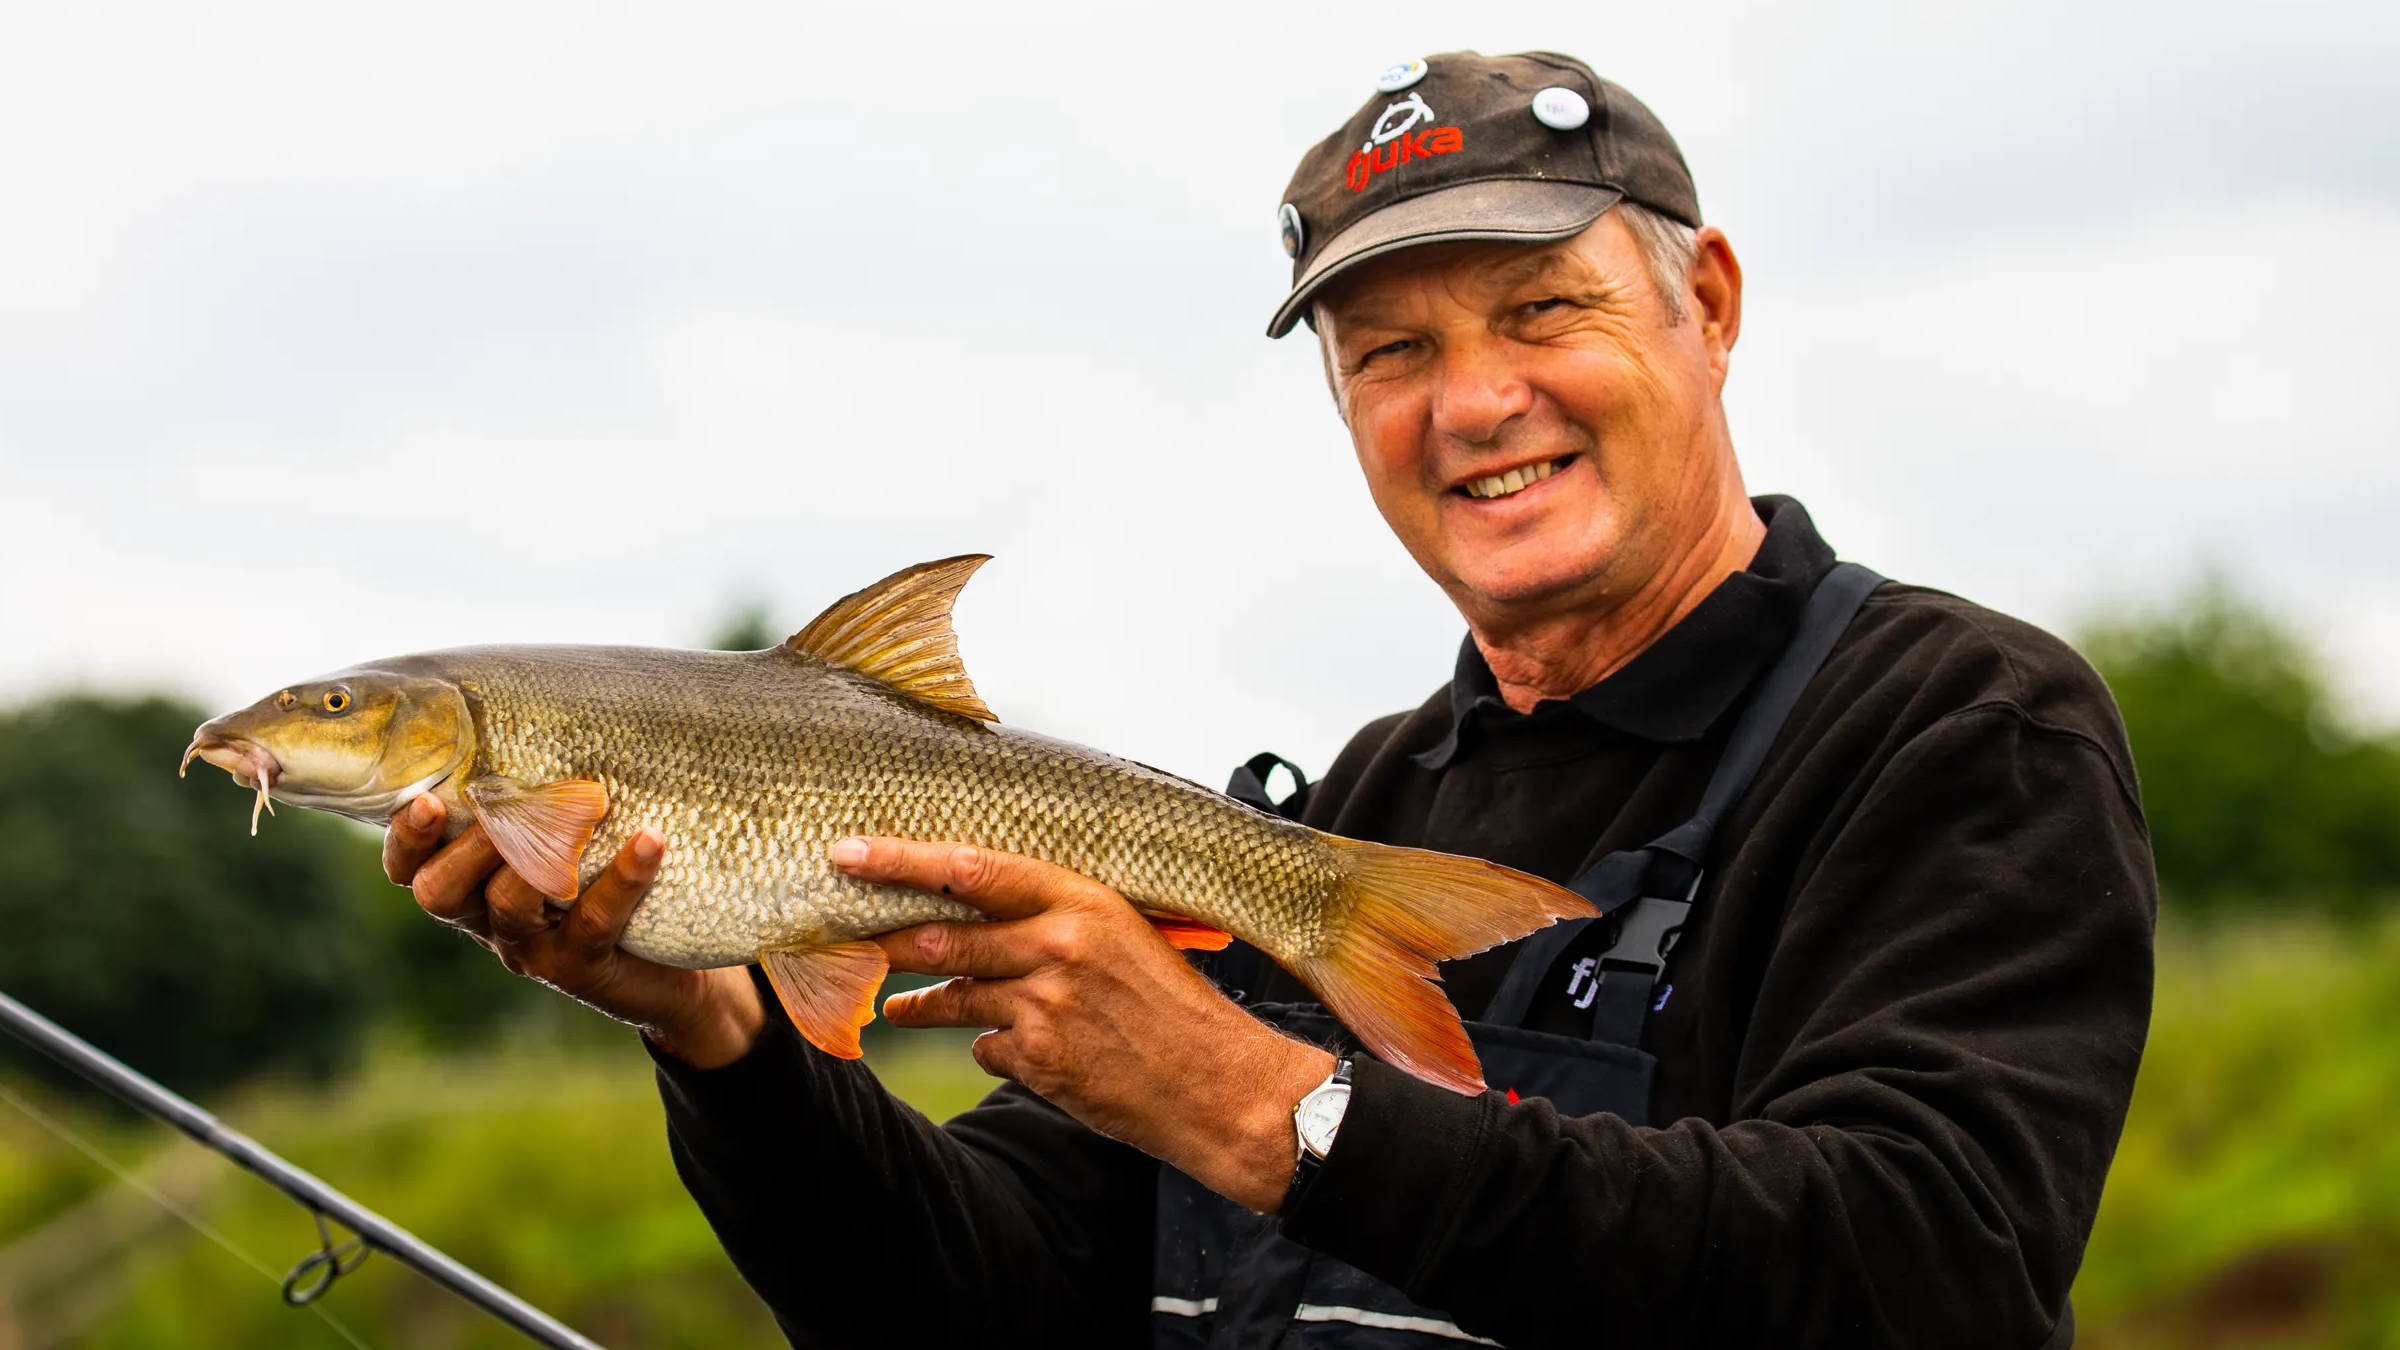 How To Catch Barbel? Ultimate Guide from River Record Holder